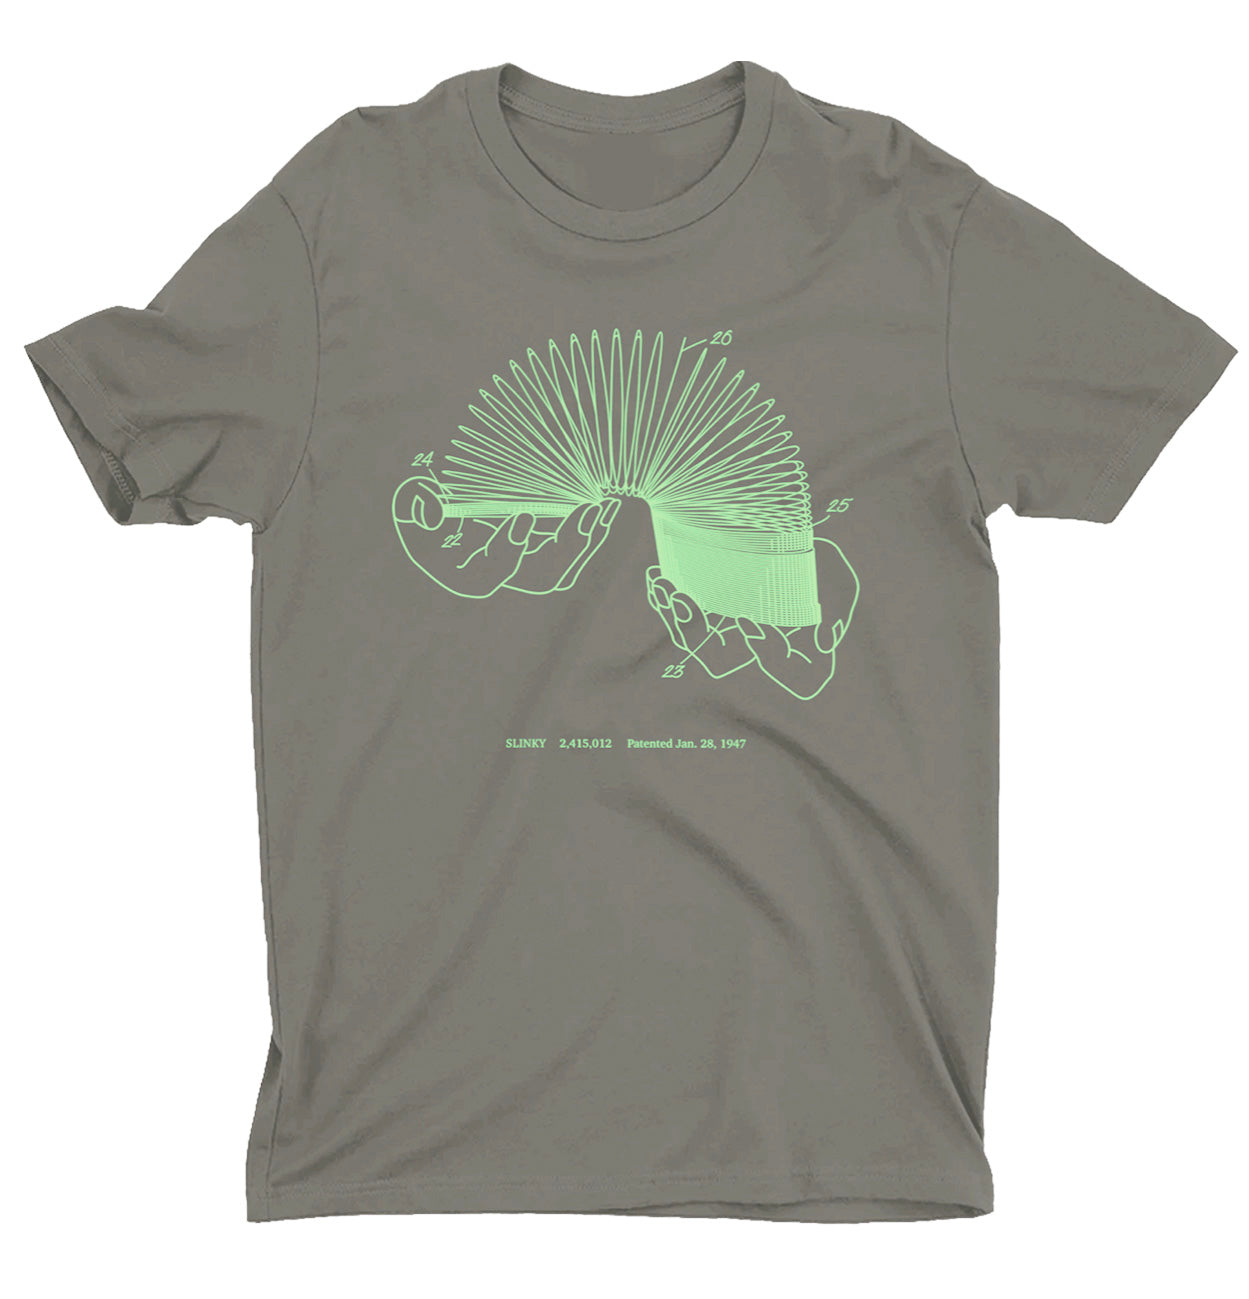 Project + Patent - Slinky T-shirt - Charcoal with Sea Foam Green Ink -  Vernakular Photo Designs | T-Shirts